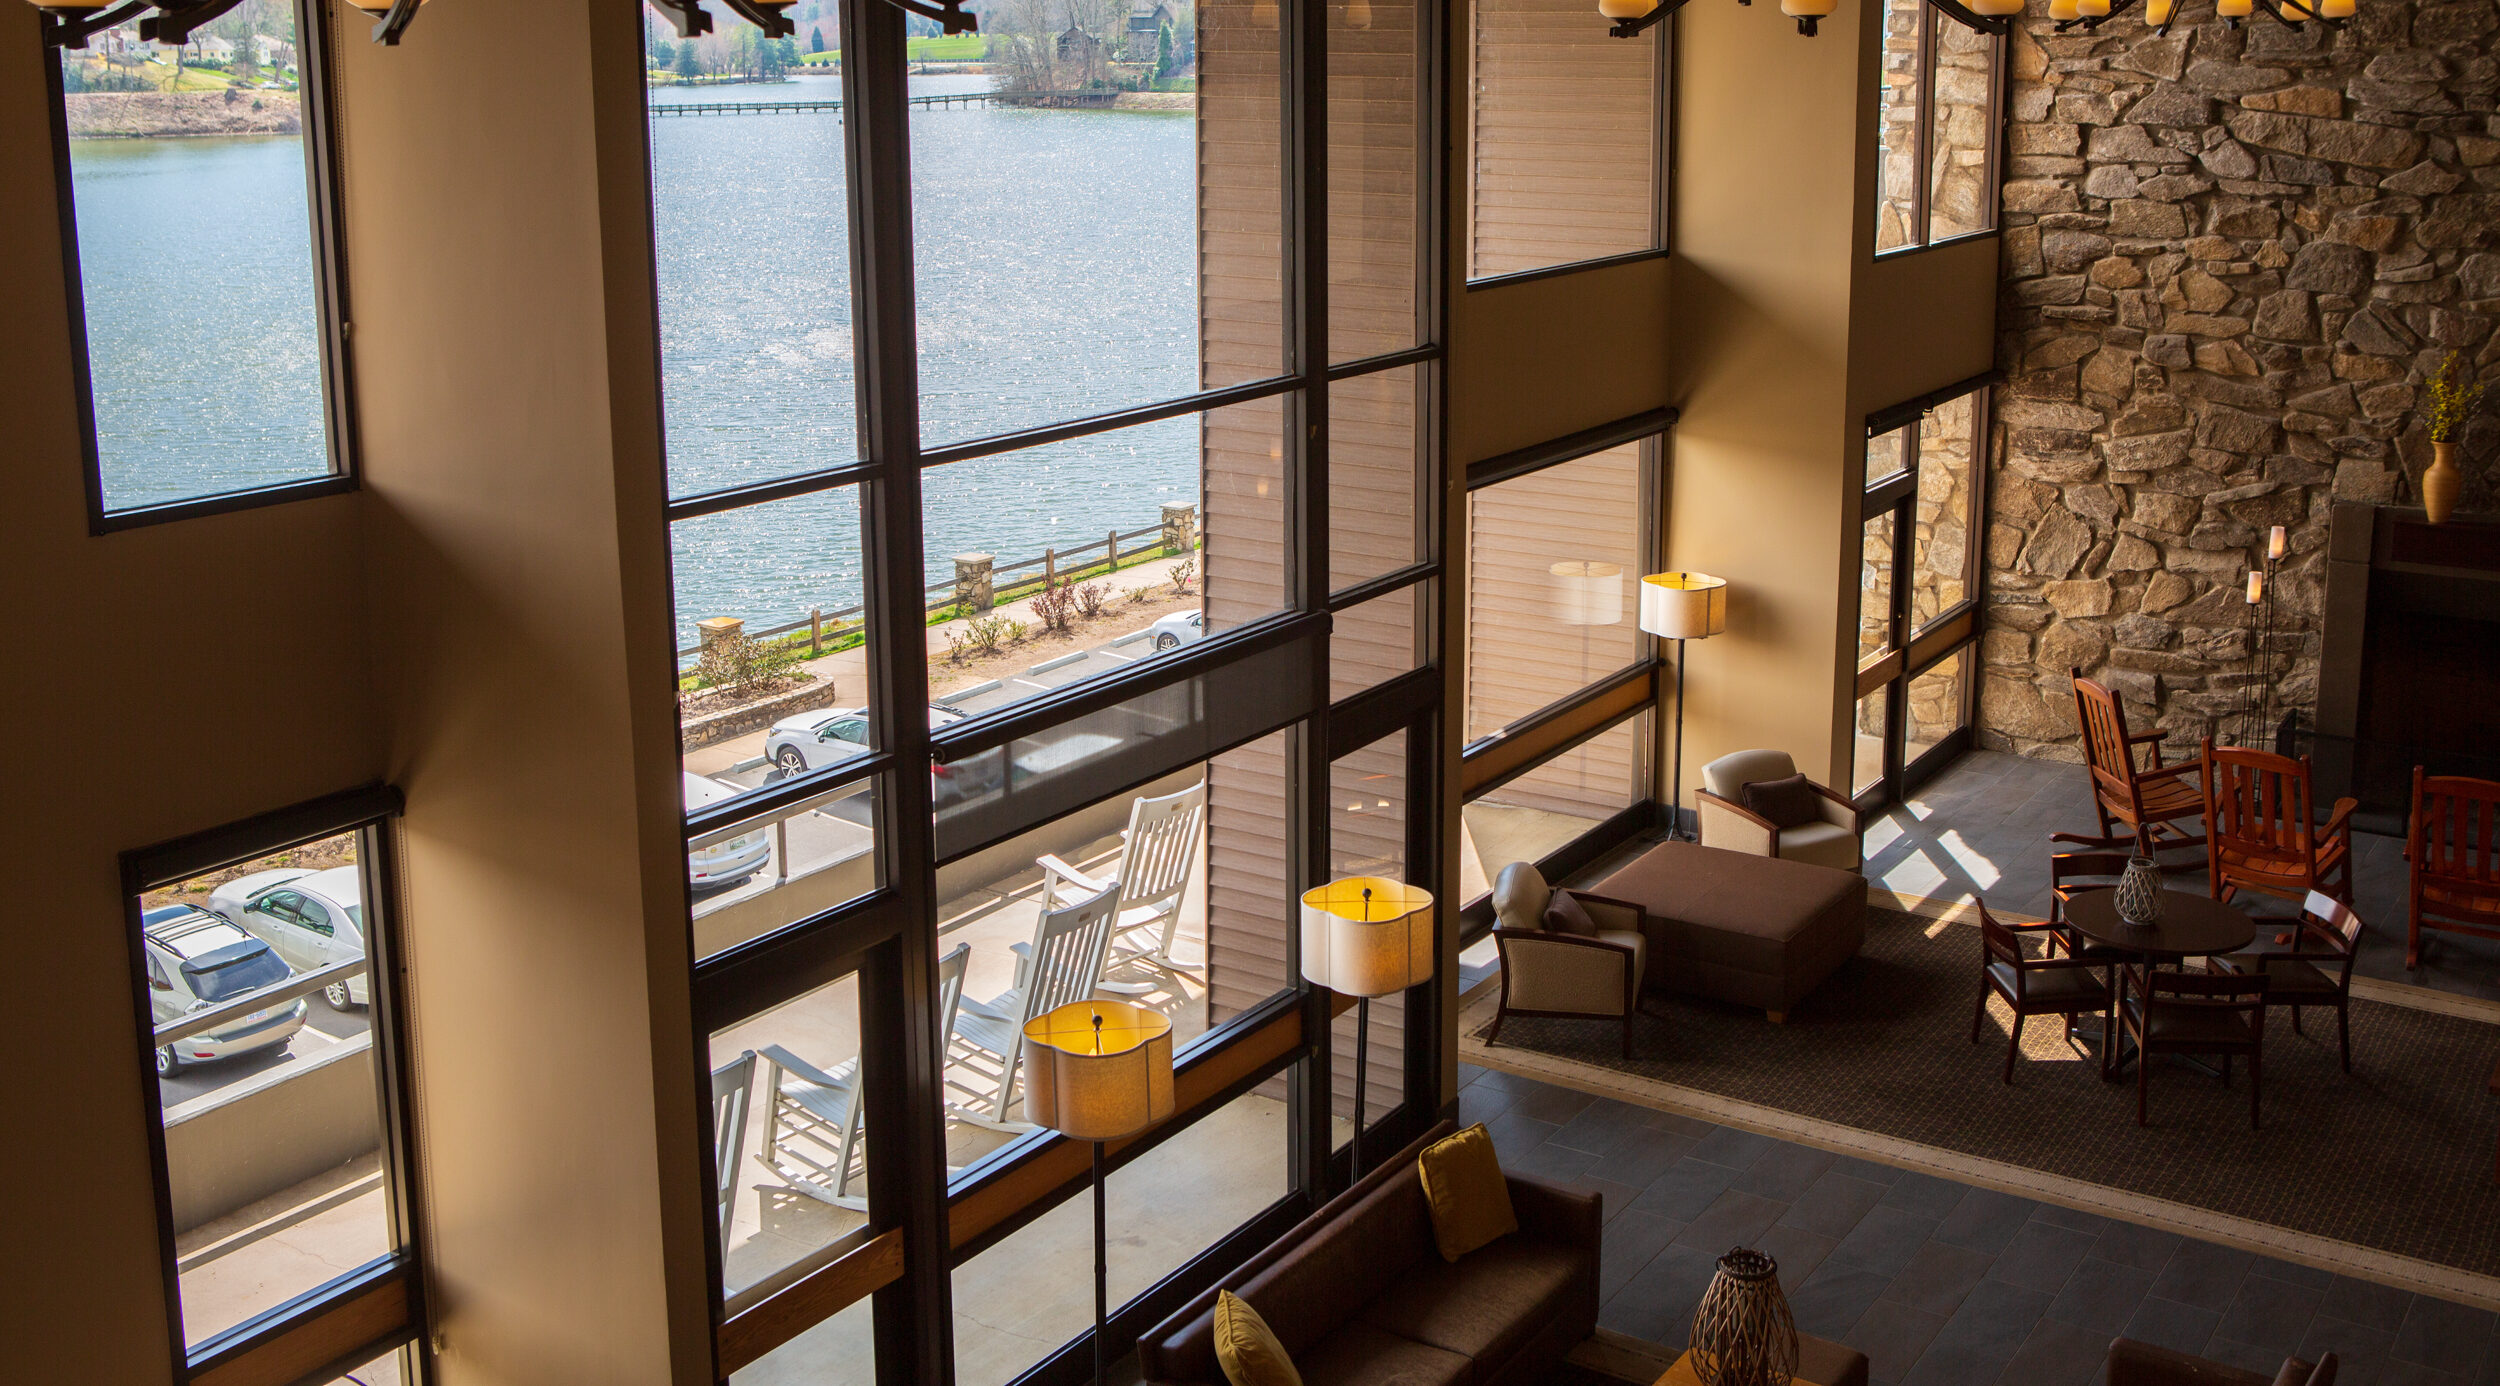 Lobby of Terrace Hotel with view of Lake Junaluska